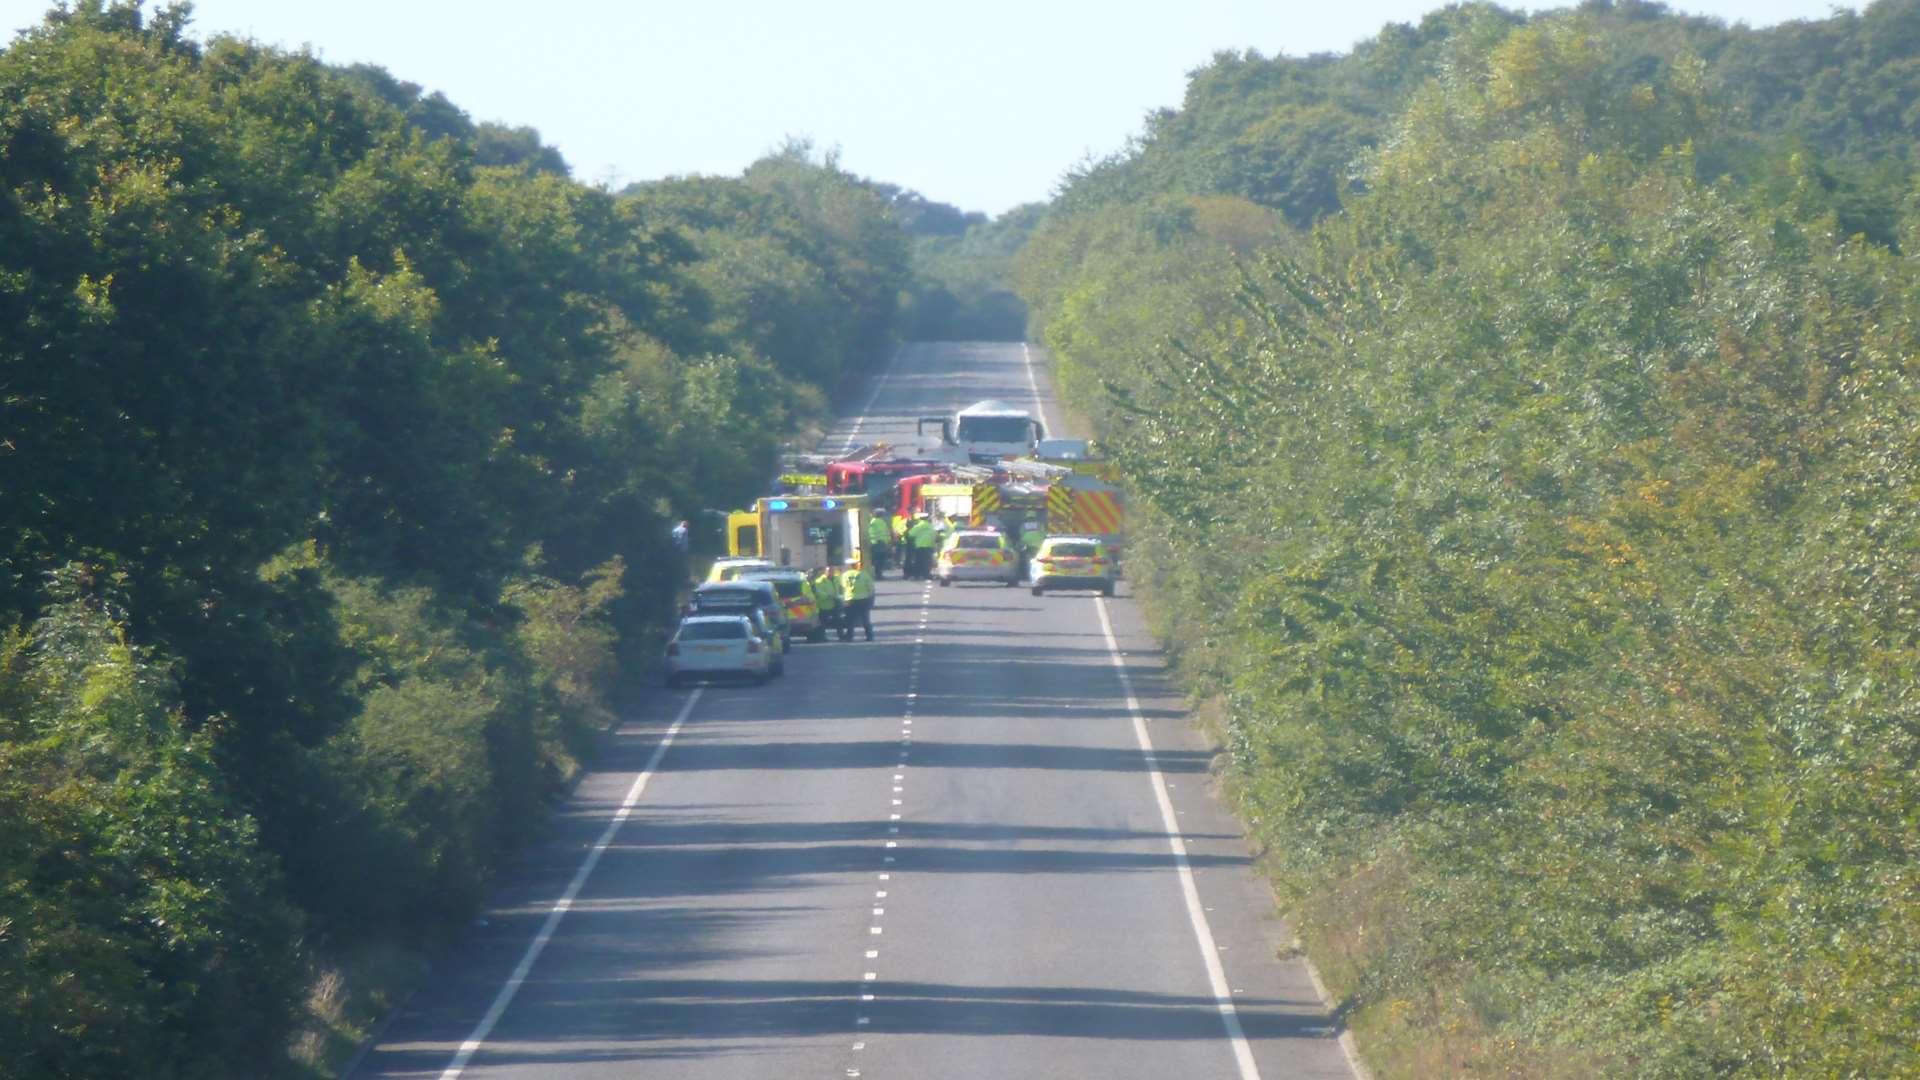 Emergency services at the scene of the horrific crash on the A2070 Hamstreet Road near Ashford in August 2014